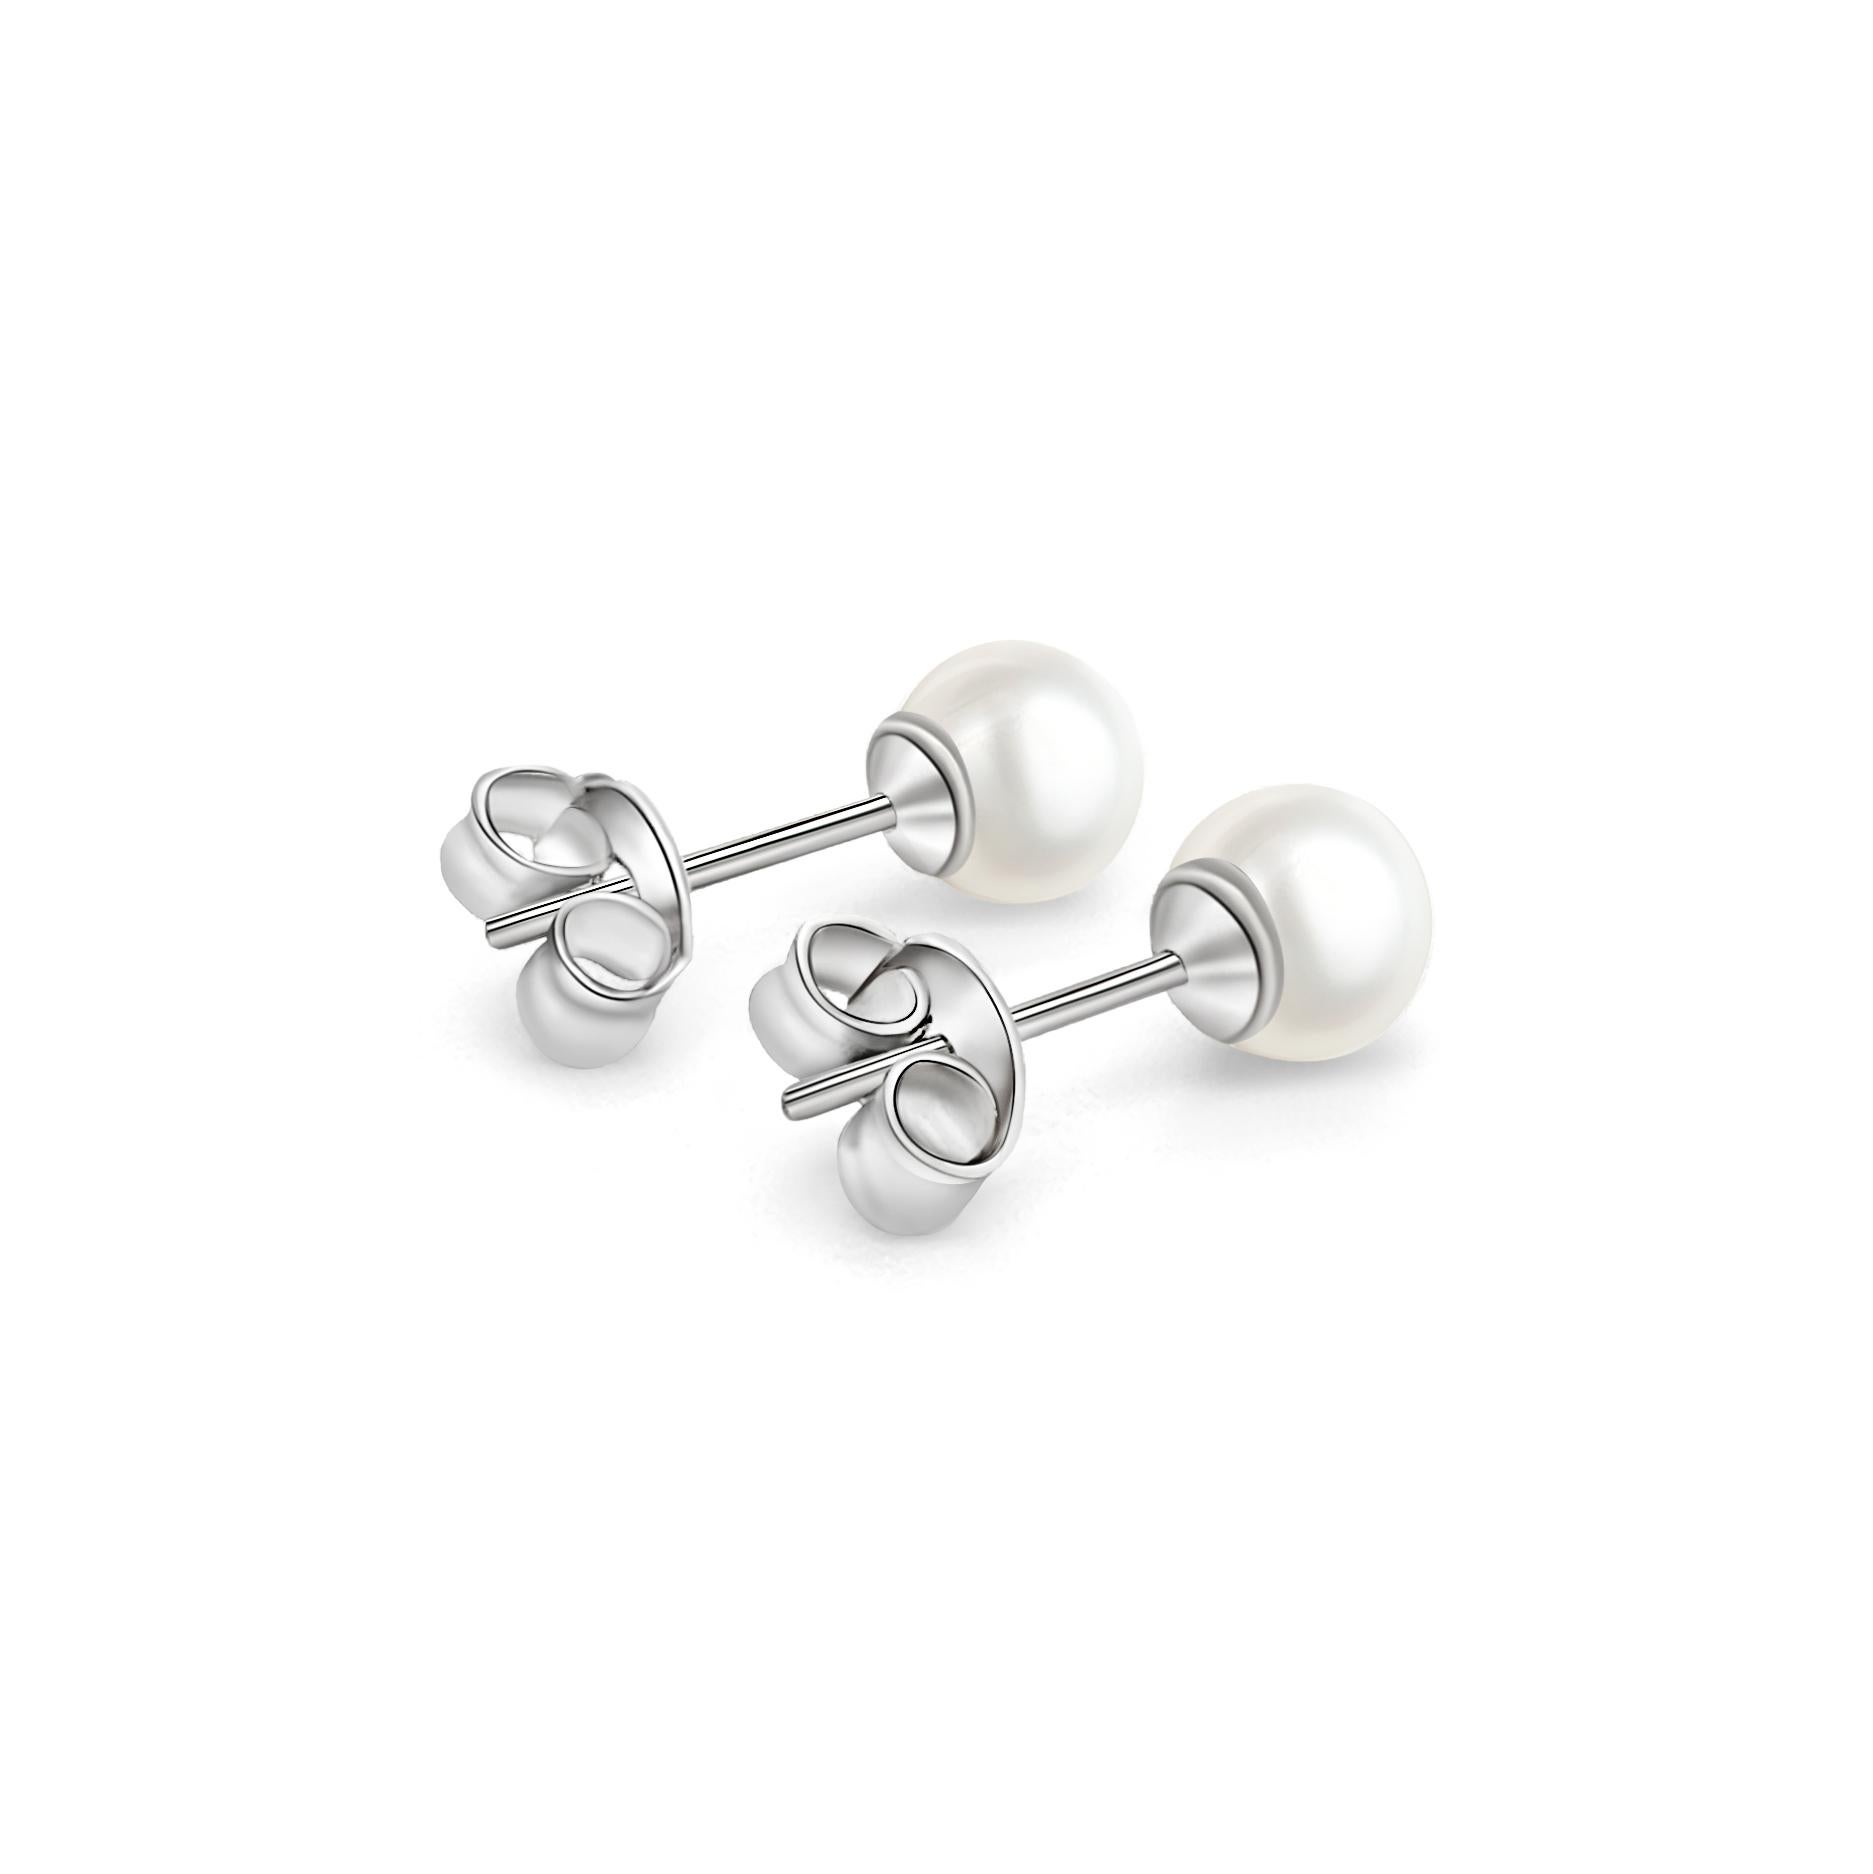 Simple and elegant real pearl stud earrings set in 14k white gold plated 925 sterling silver for long-lasting and durable use. Push-back closure with 2 tightness levels for extra versatility and comfort. Additional pair of silicone backs